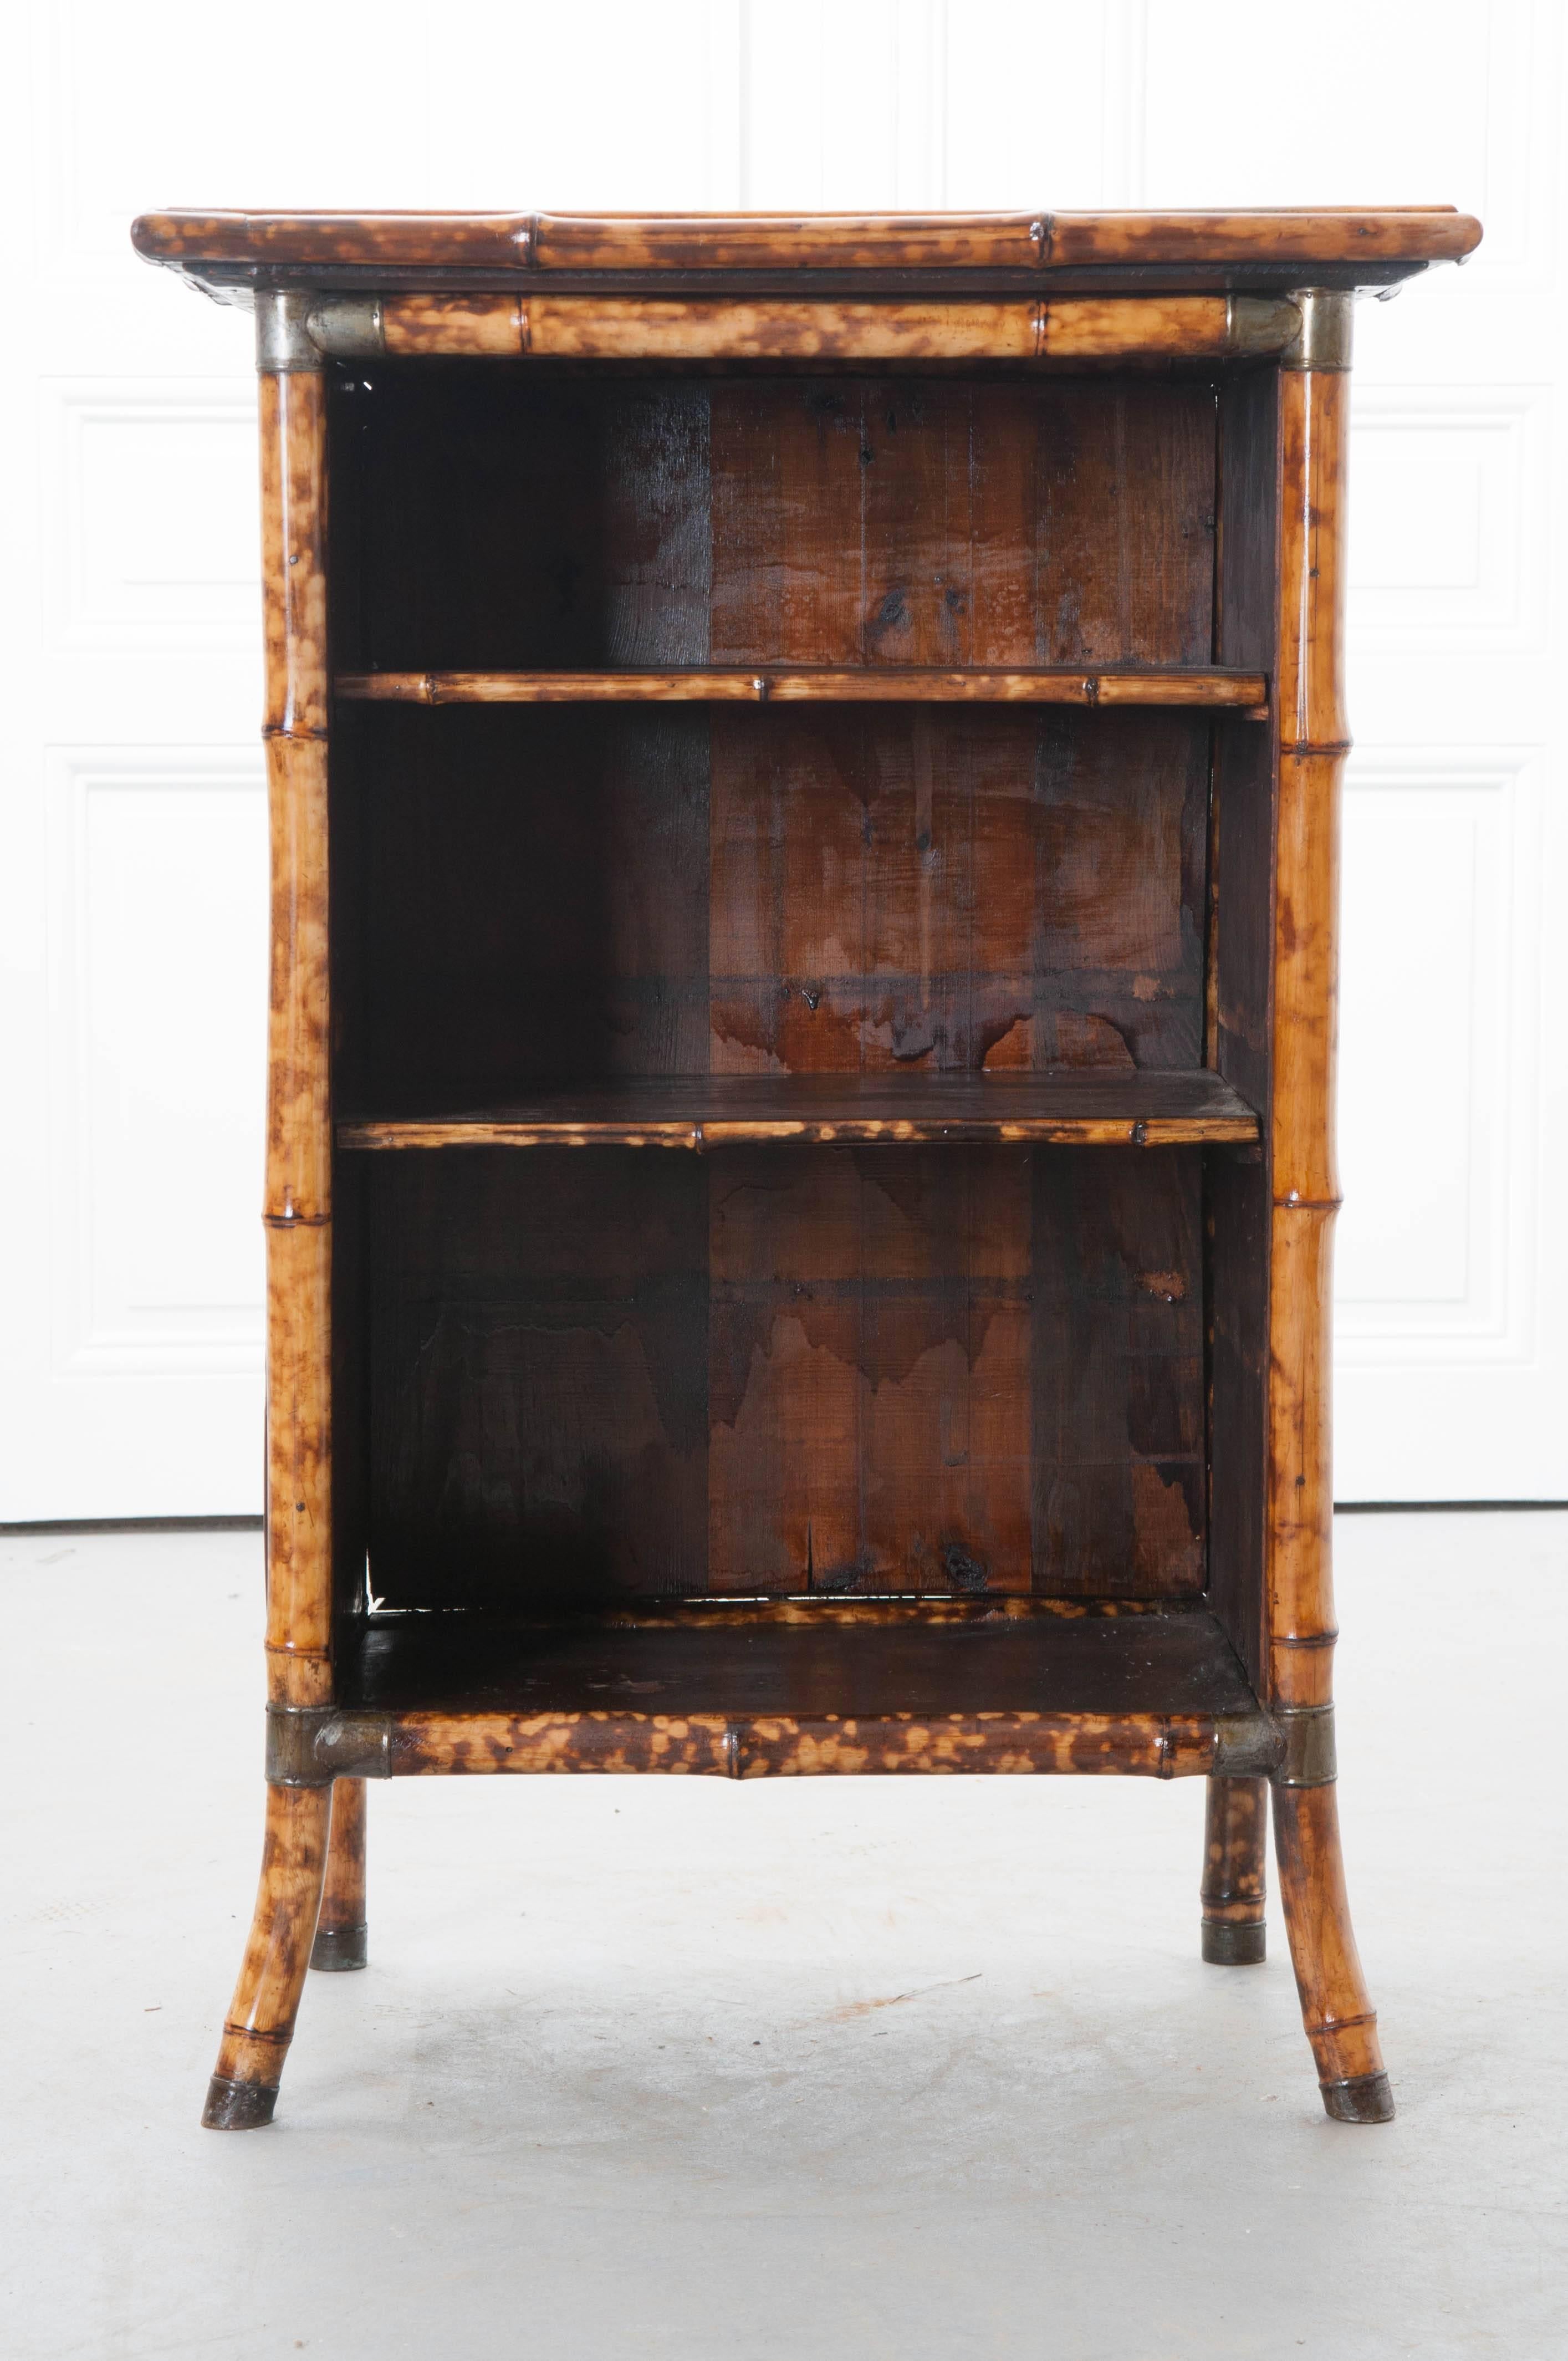 A fabulous Victorian bamboo bookcase from 19th century, England, that has been more recently decoupaged with an assortment of beautiful gold colored shells on its top and sides. This bookcase has metal reinforced corners for added stability and